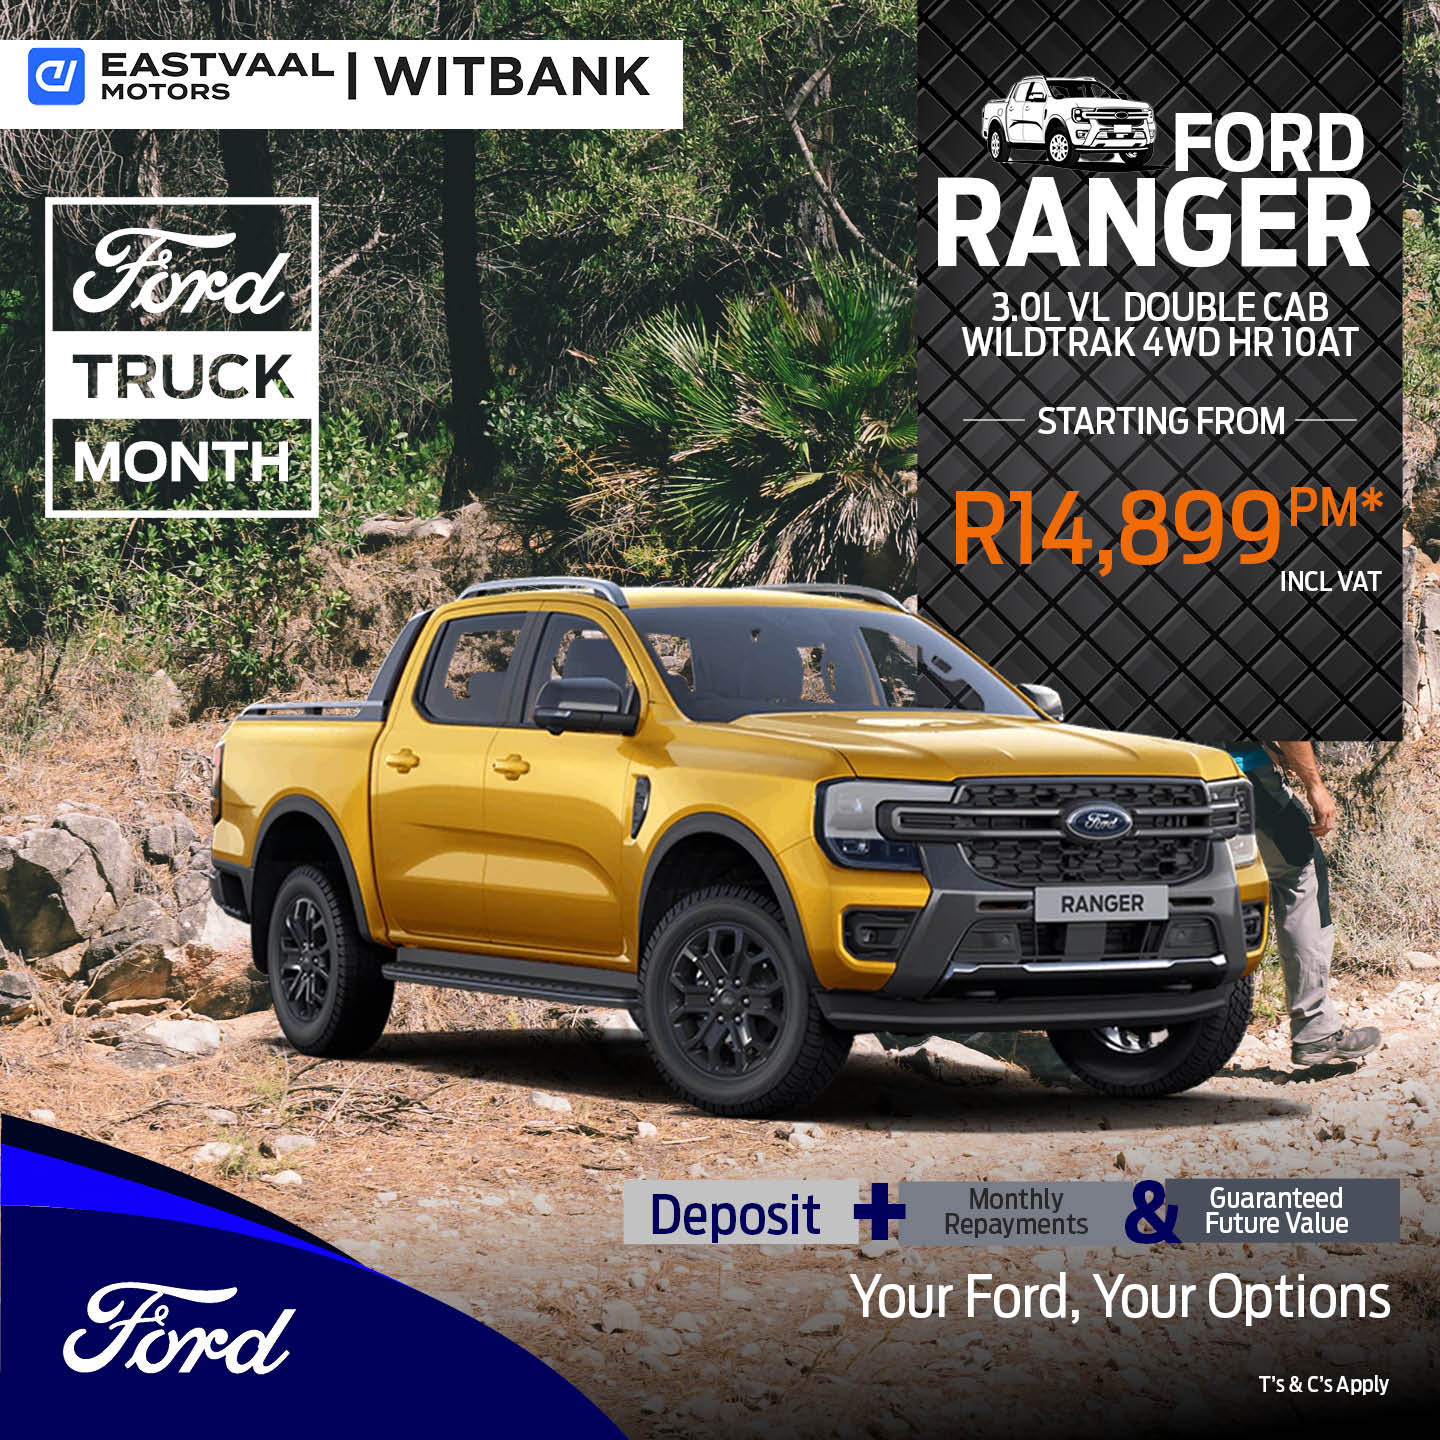 Ford Ranger 3.0L V6 Double Cab WildTrak 4WD HR 10AT image from 